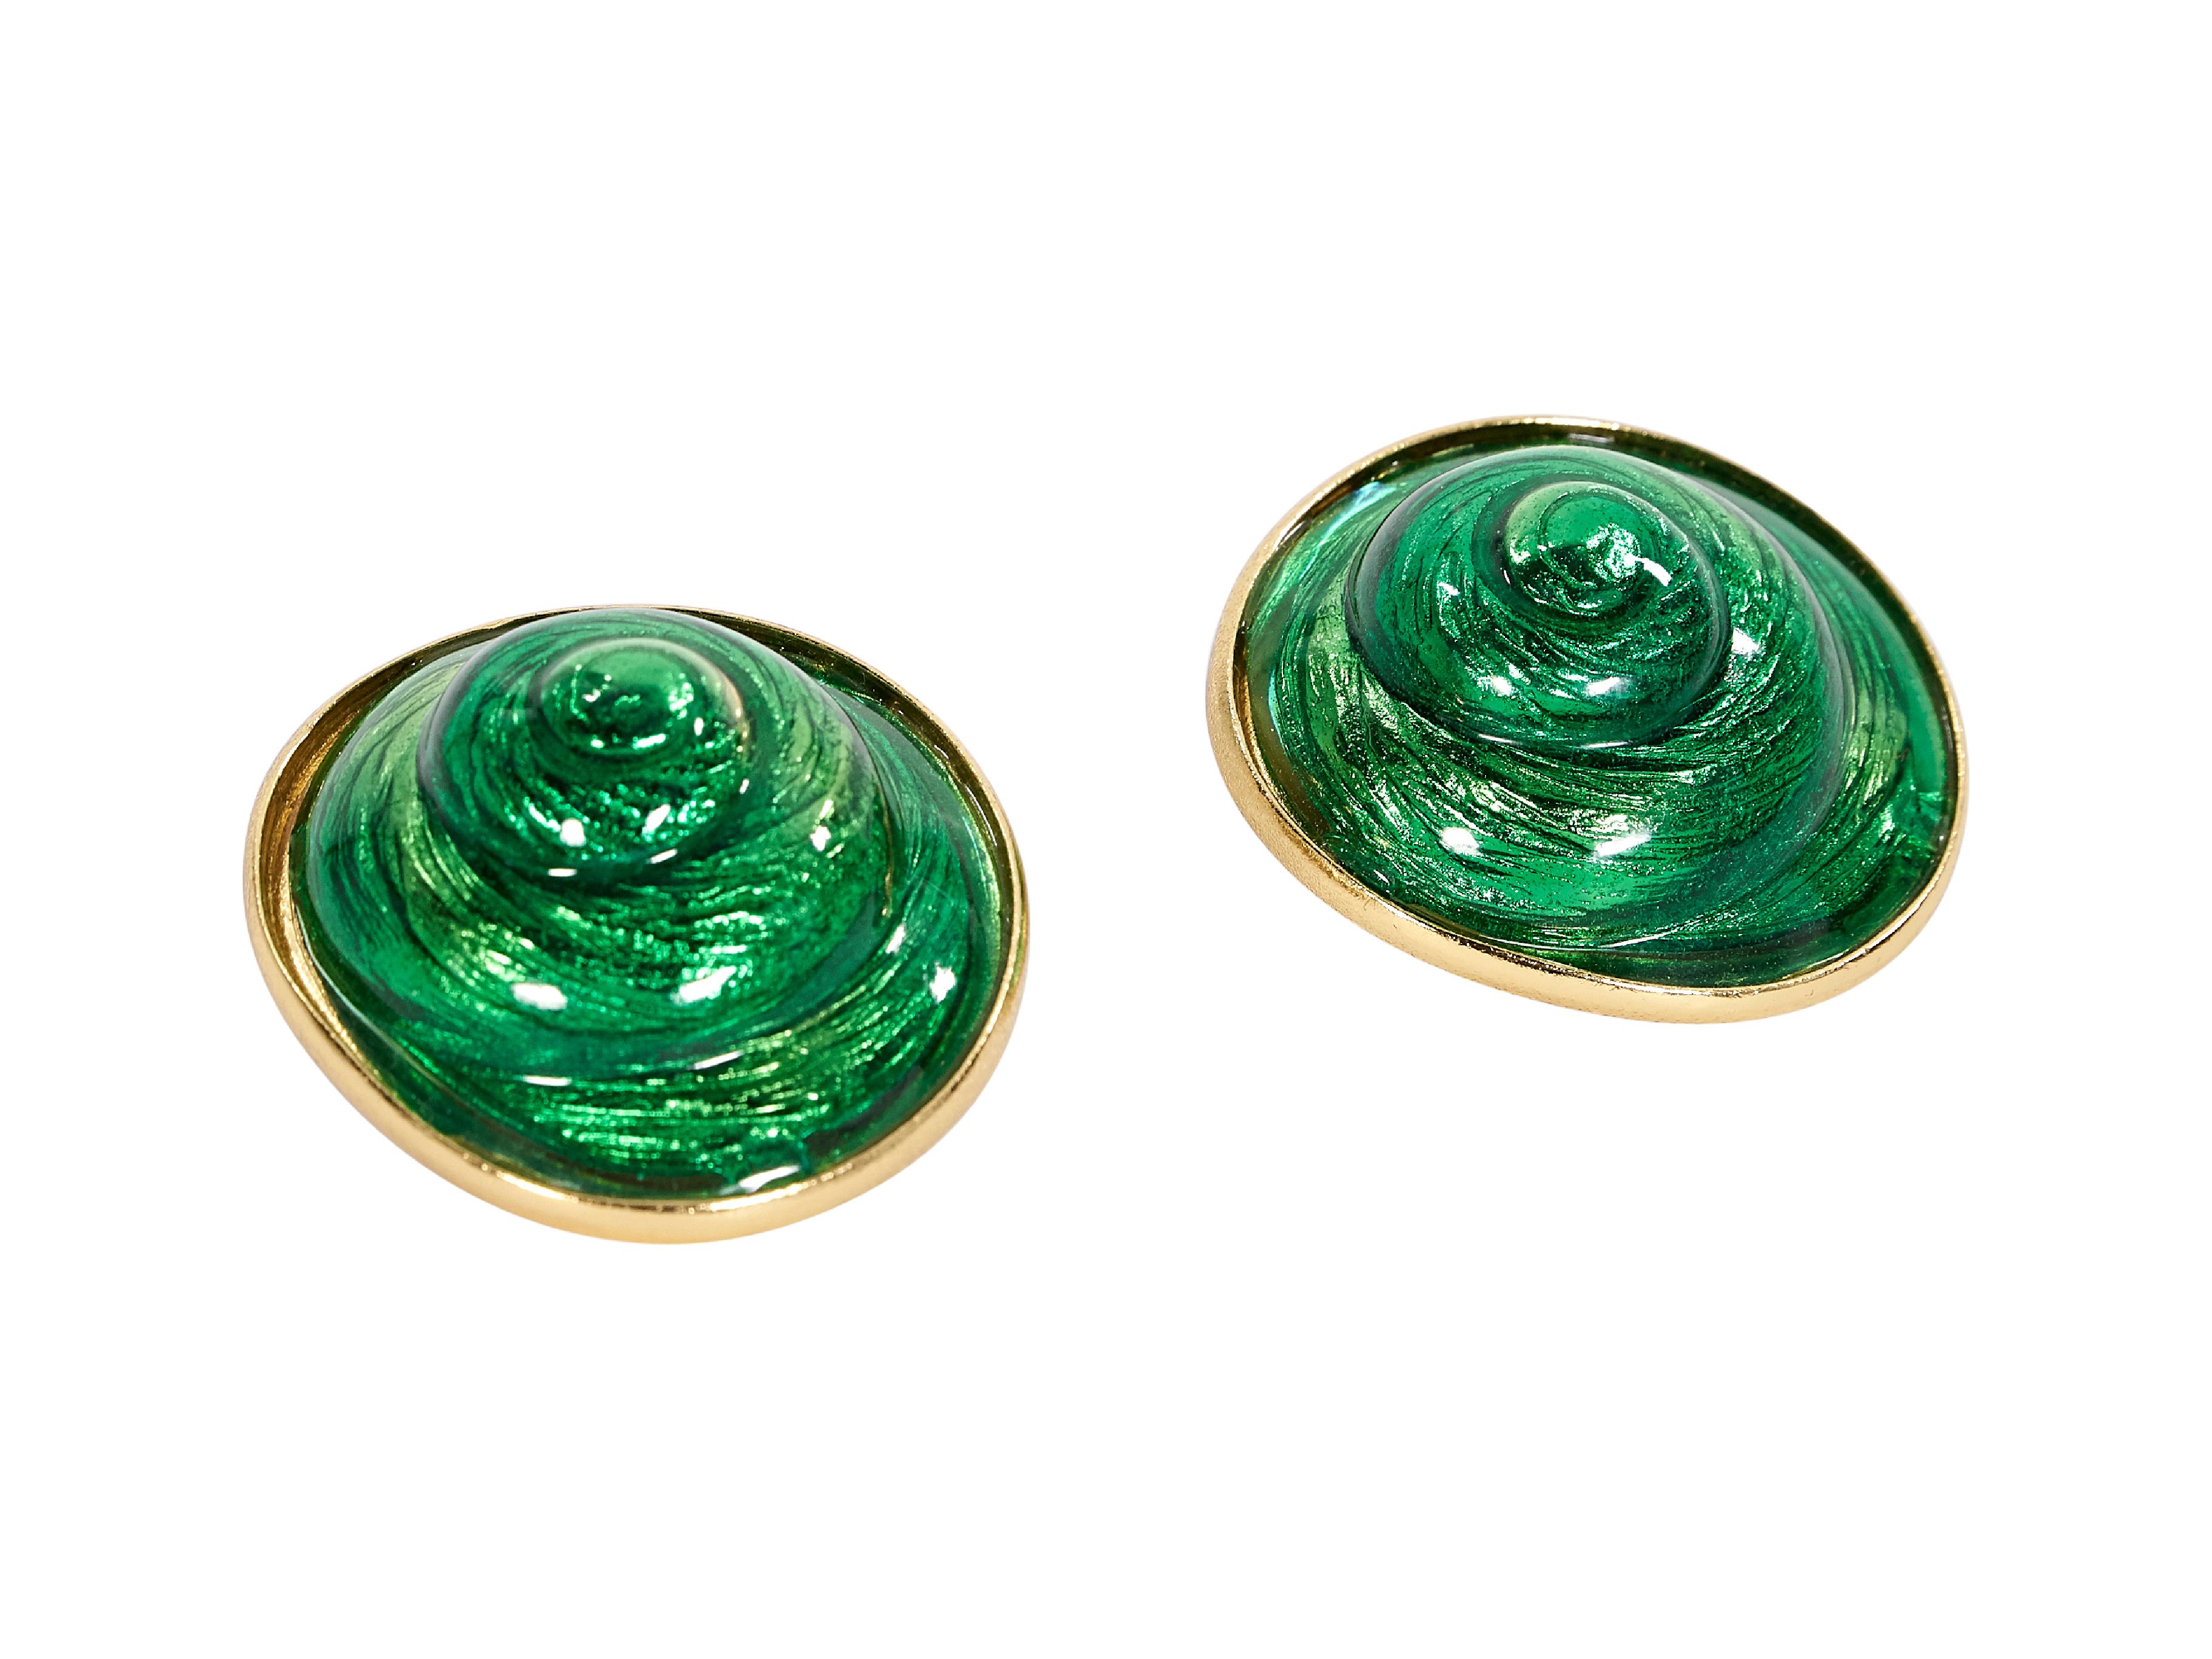 Product details:  Vintage green swirl circular earrings by Yves Saint Laurent Rive Gauche.  Clip-on backing.  1.75